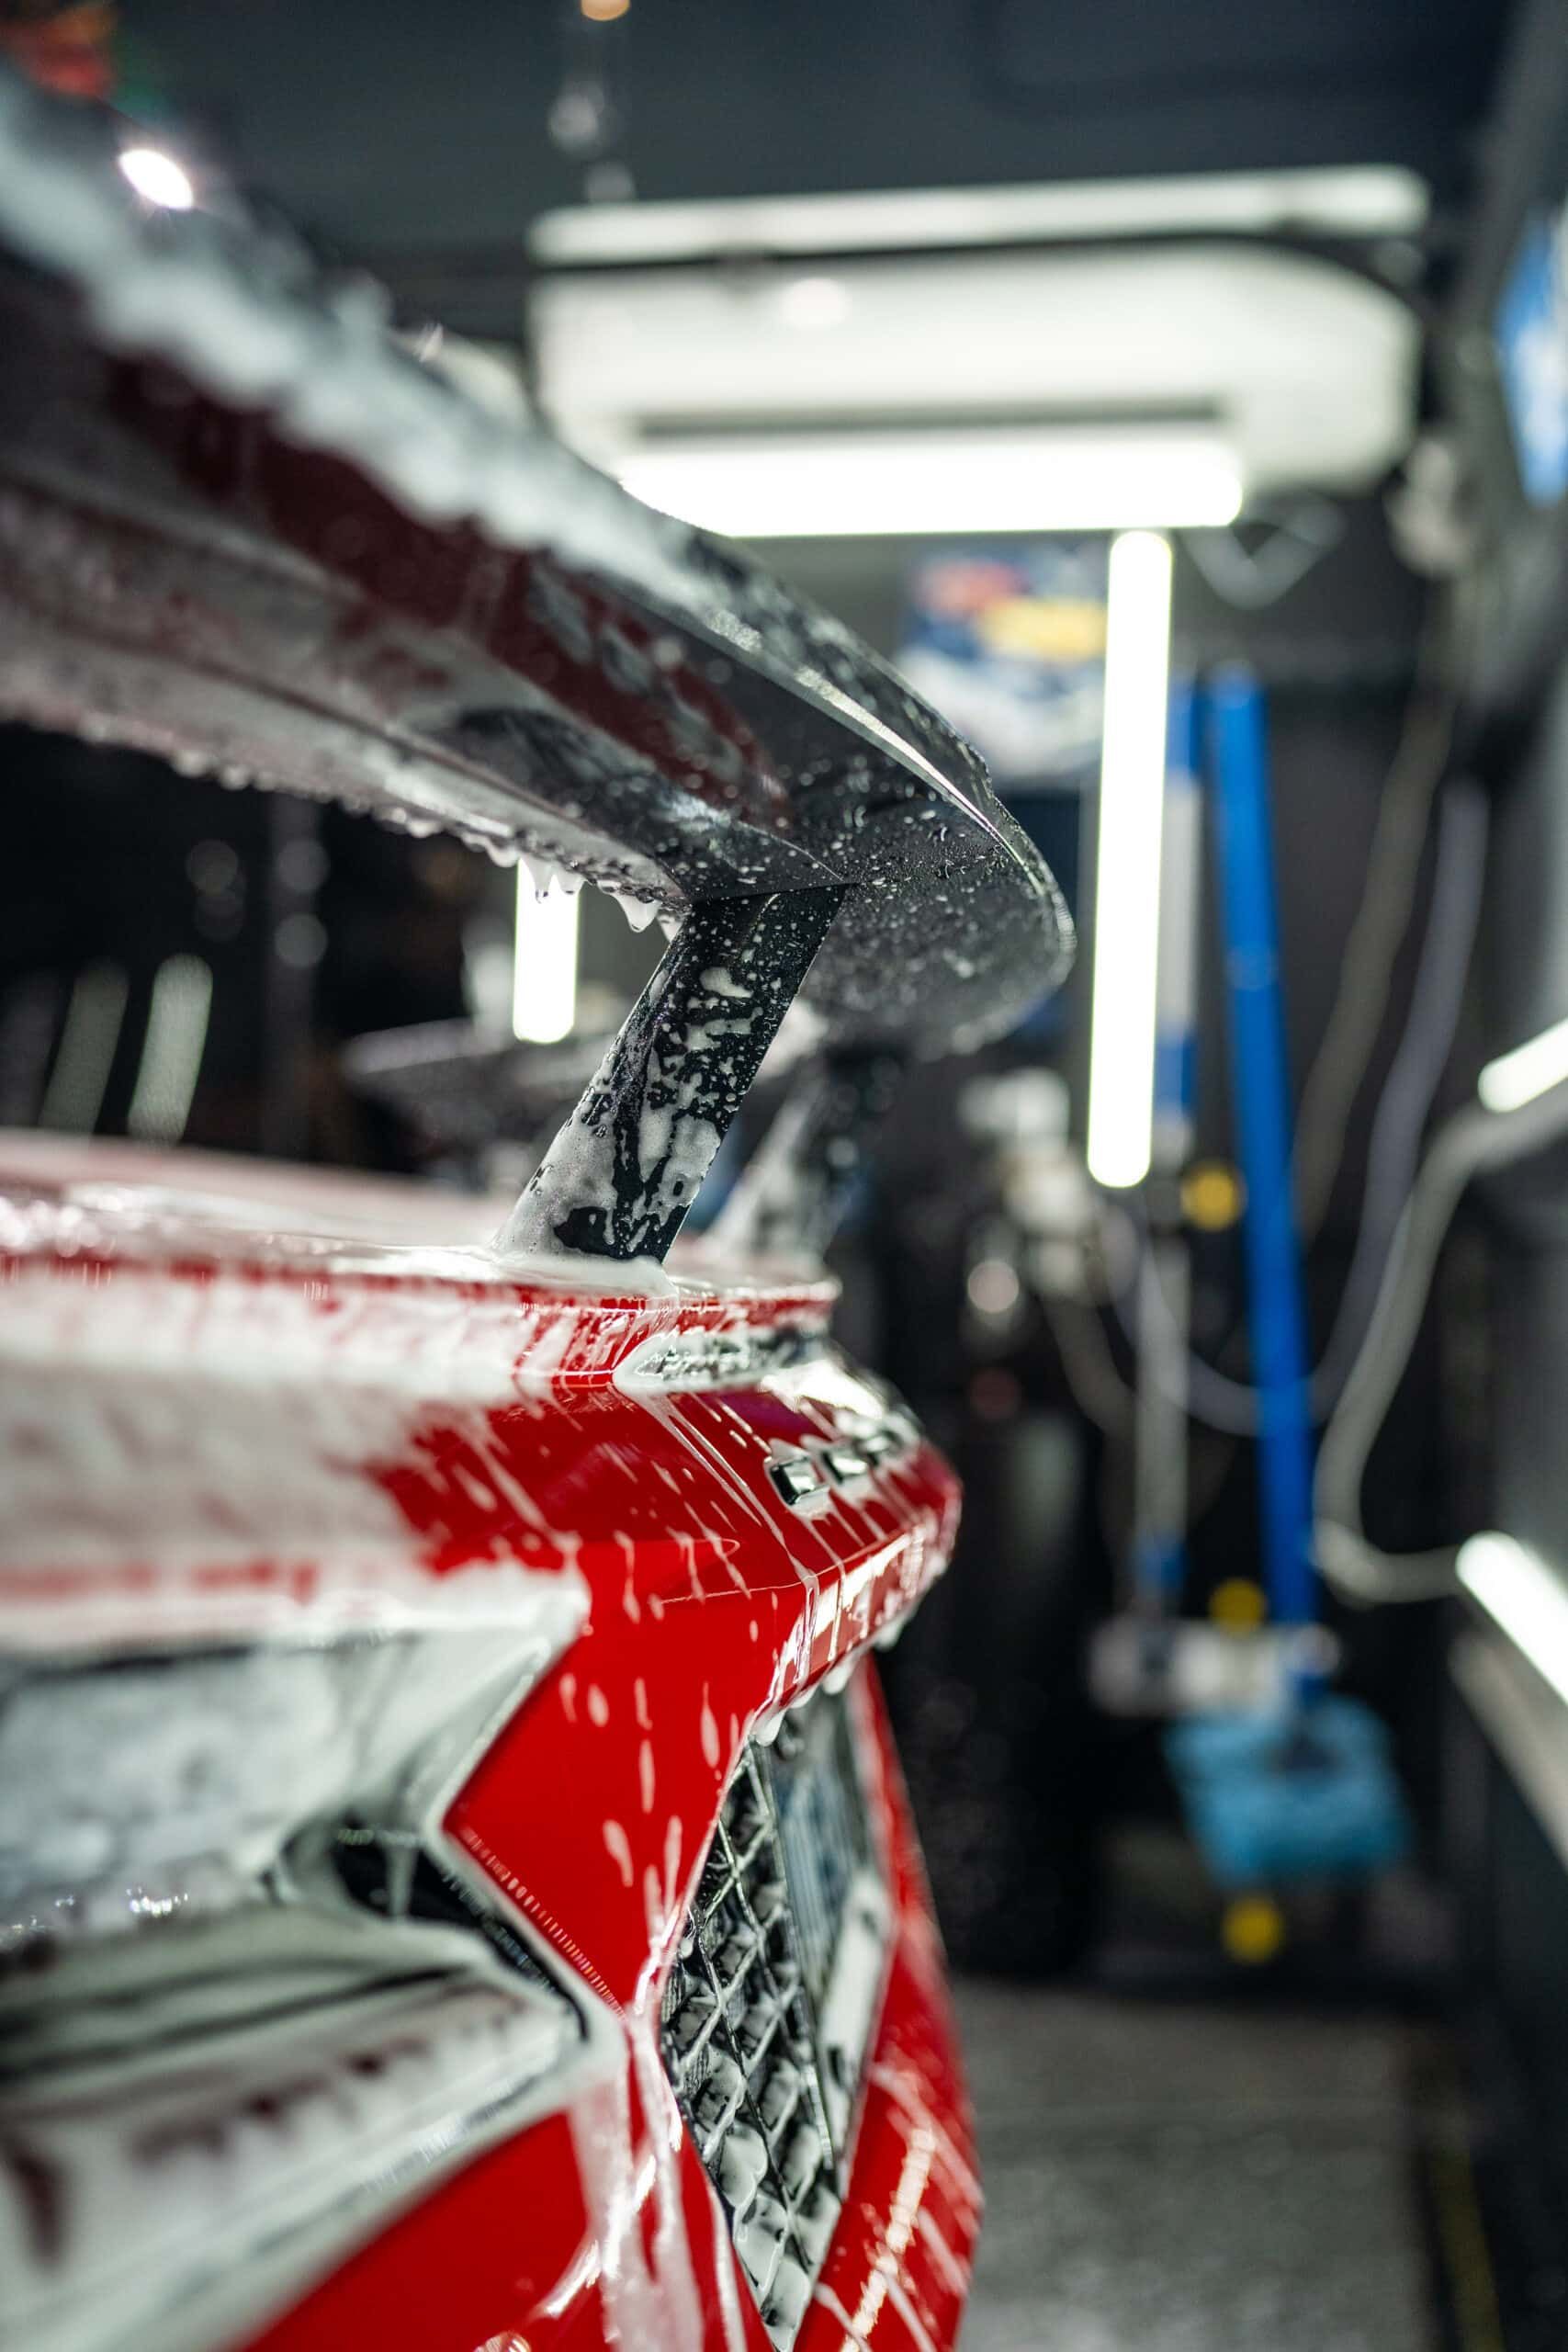 A close up of a red car being washed in a car wash.